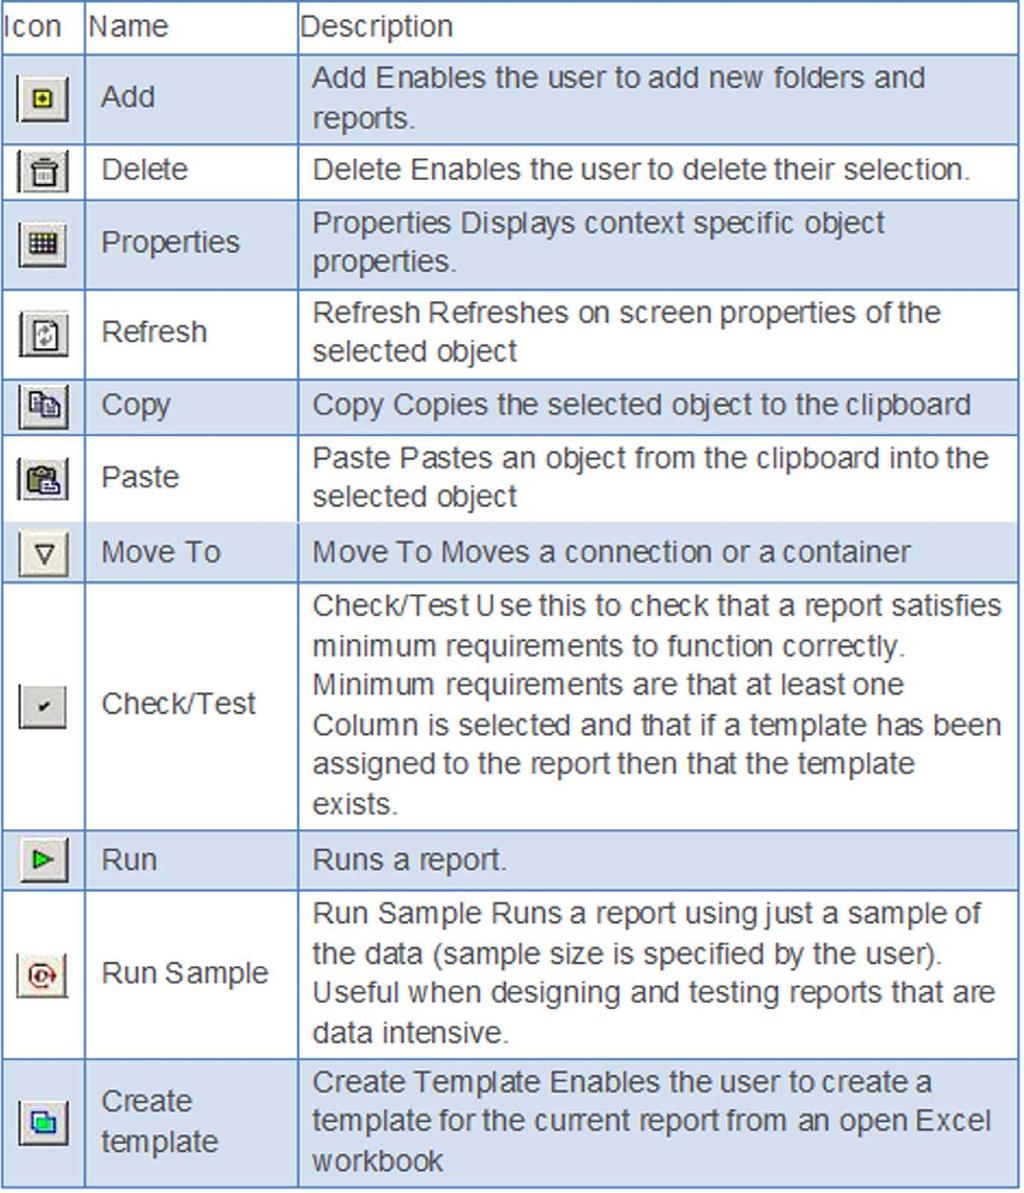 Report Manager Toolbar Icons Question: I am using the Sage Intelligence Report Manager Module, there are a lot of icons on the toolbar, but I am unsure of